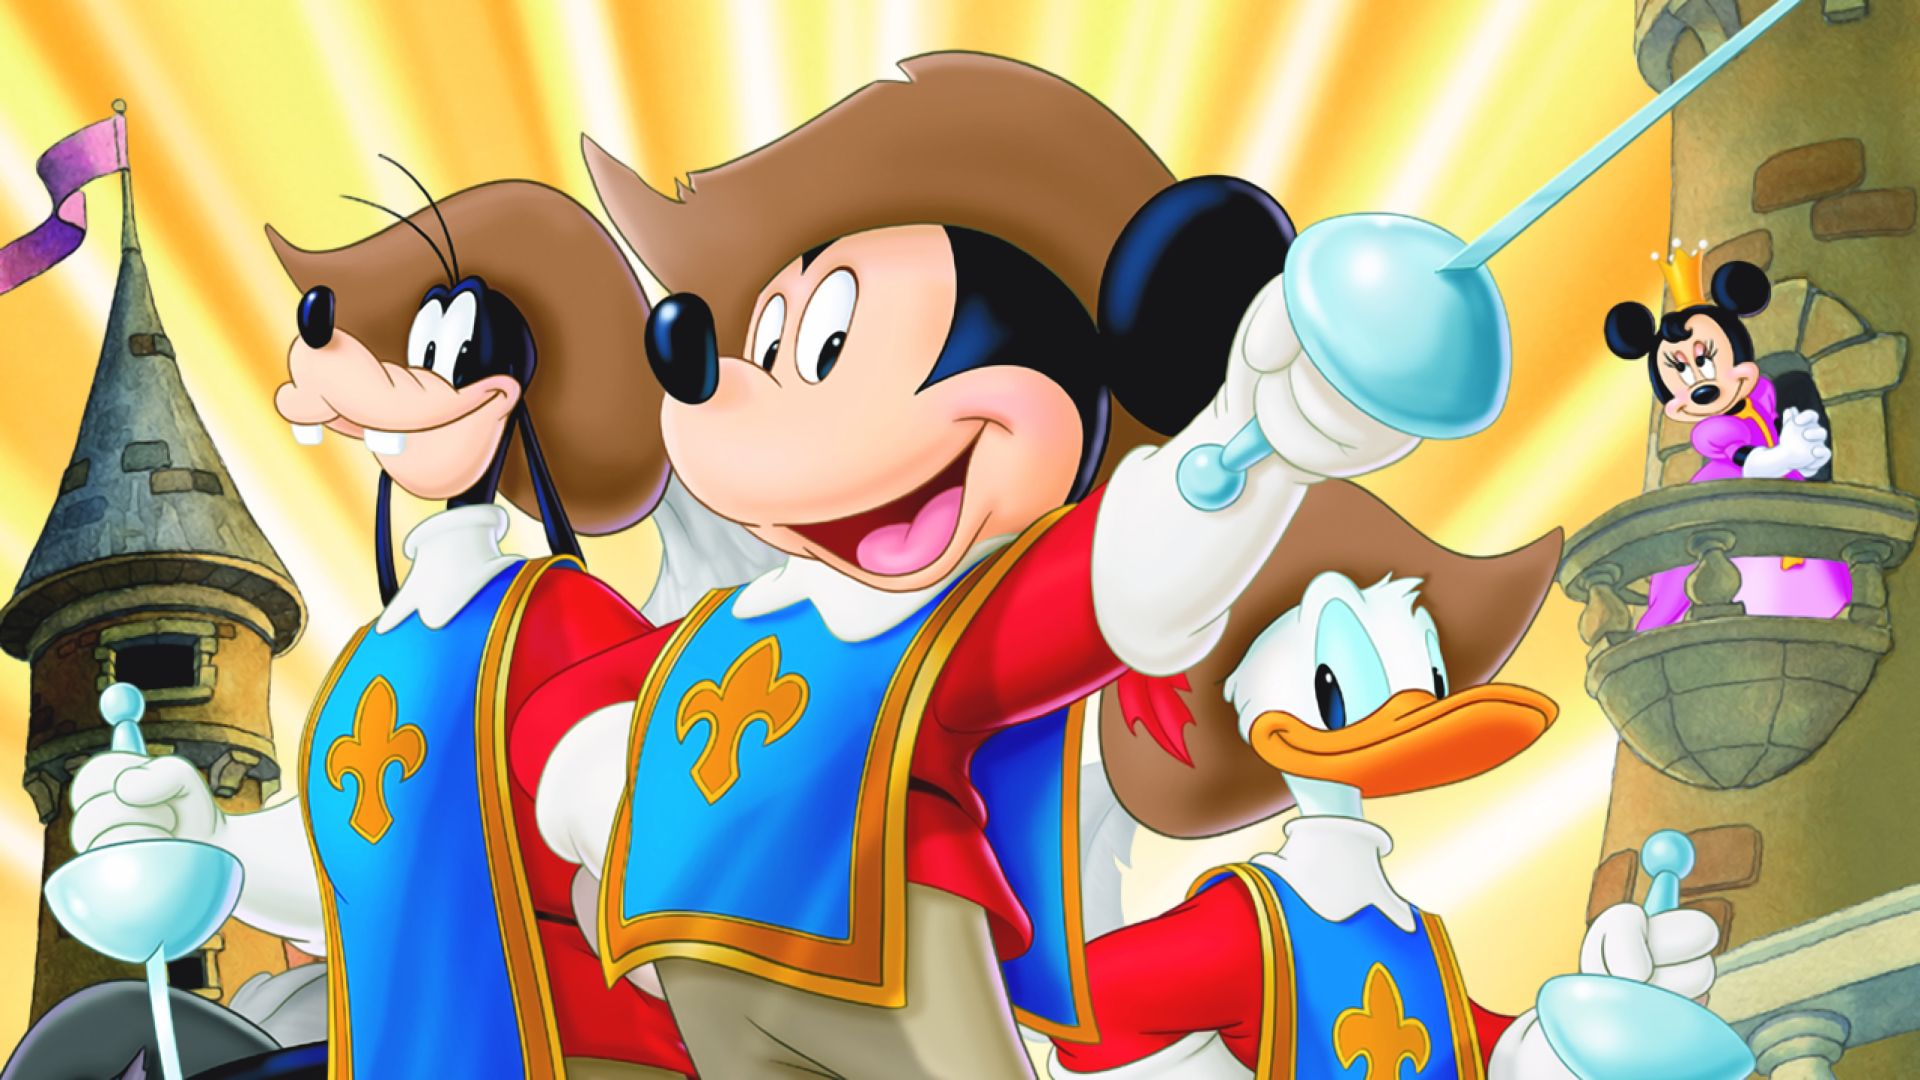 Mickey, Donald, Goofy: The Three Musketeers background